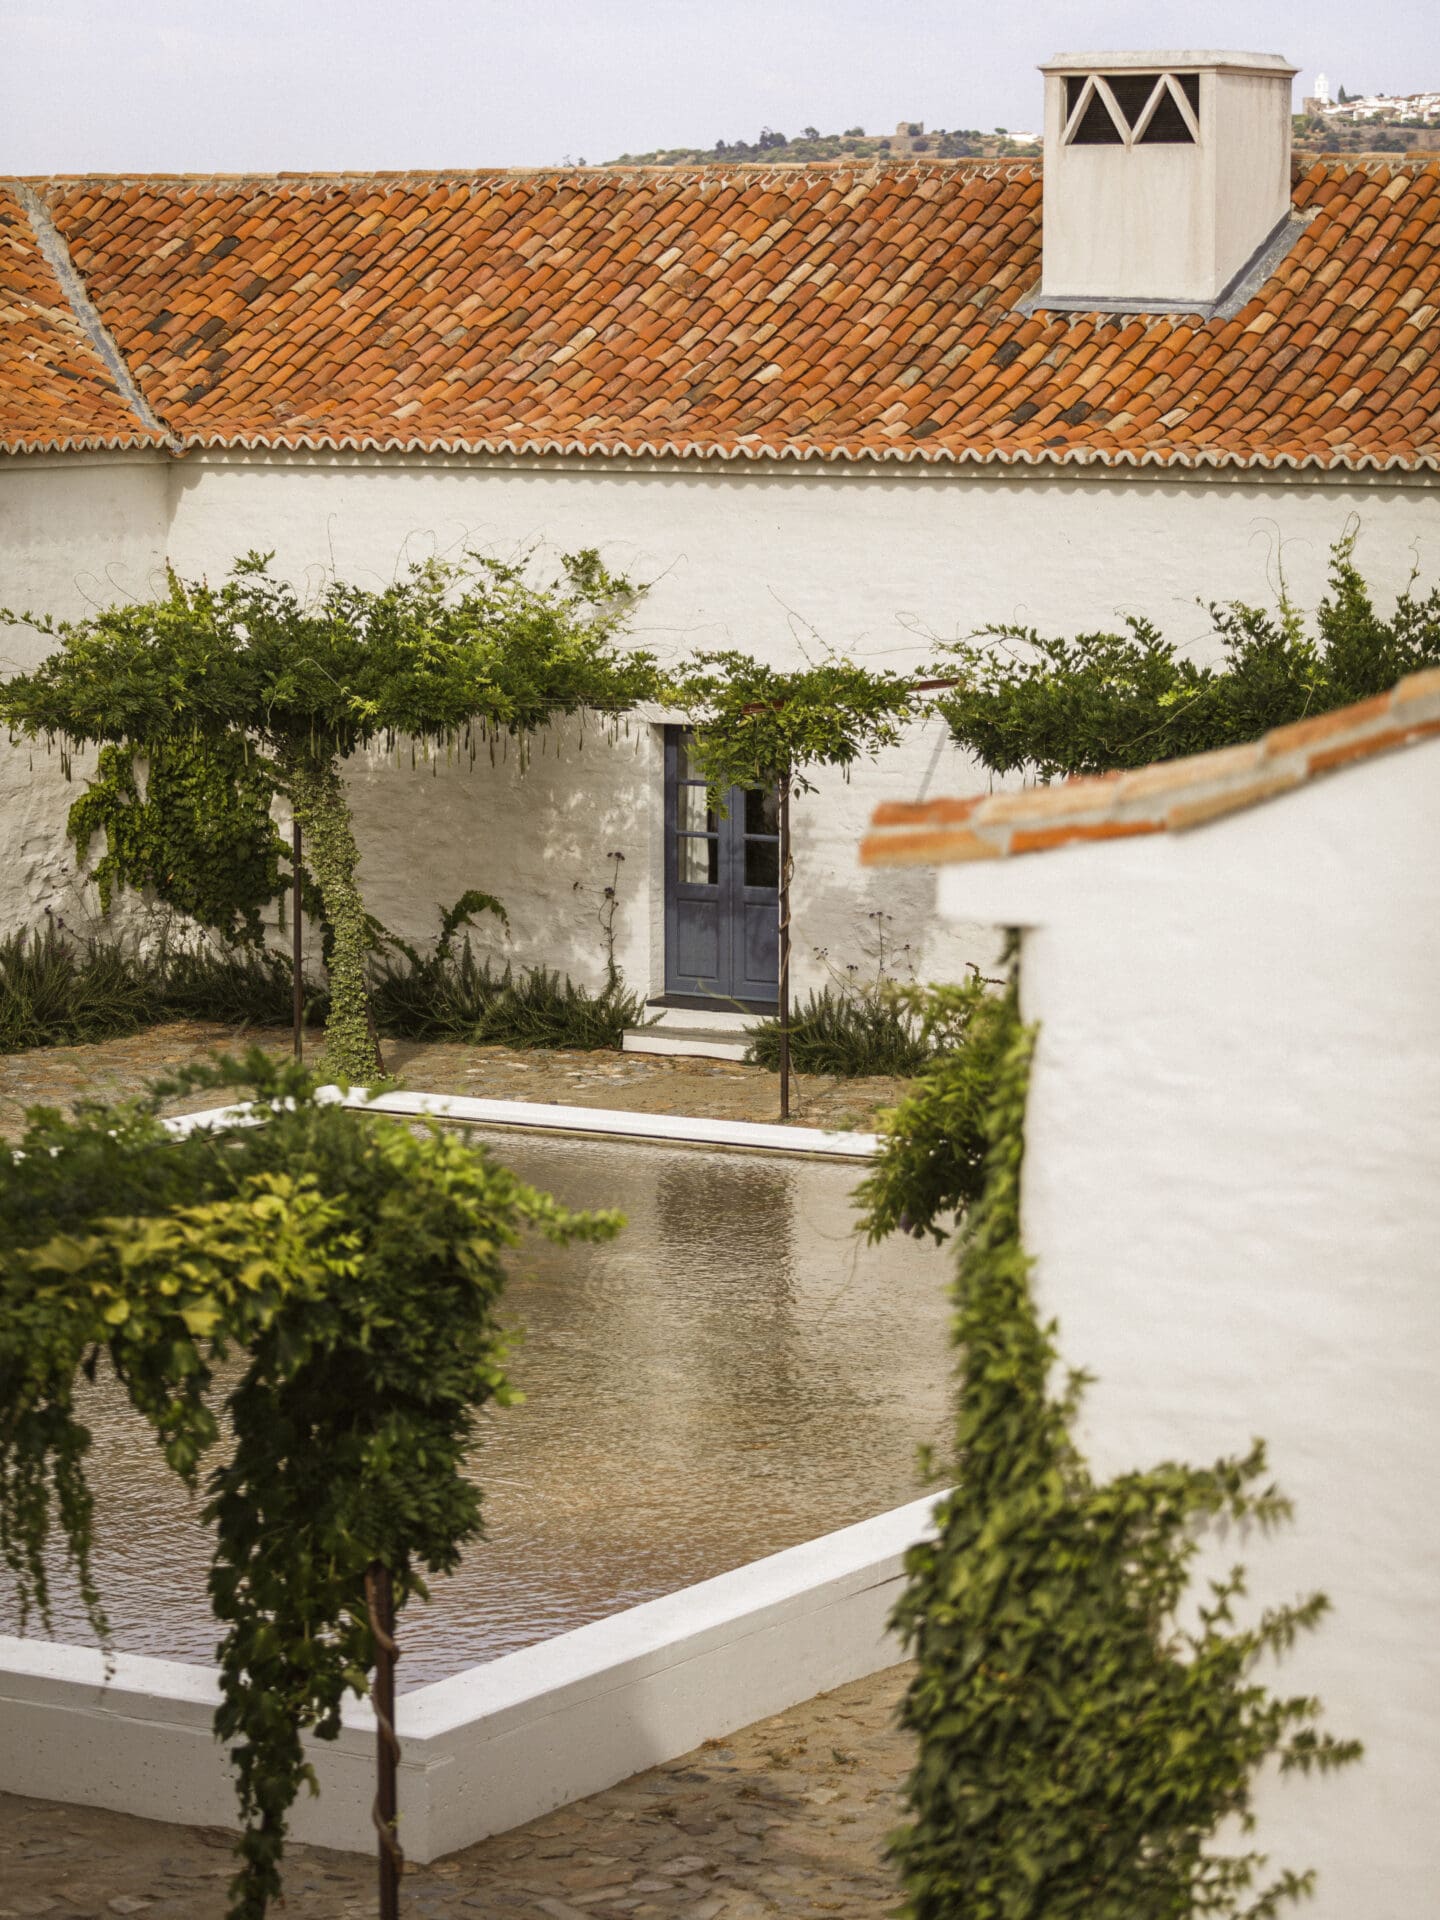 São Lourenço do Barrocal | whitewashed buildings with terracotta-tiled roofs border a shallow square pool, surrounded by vines